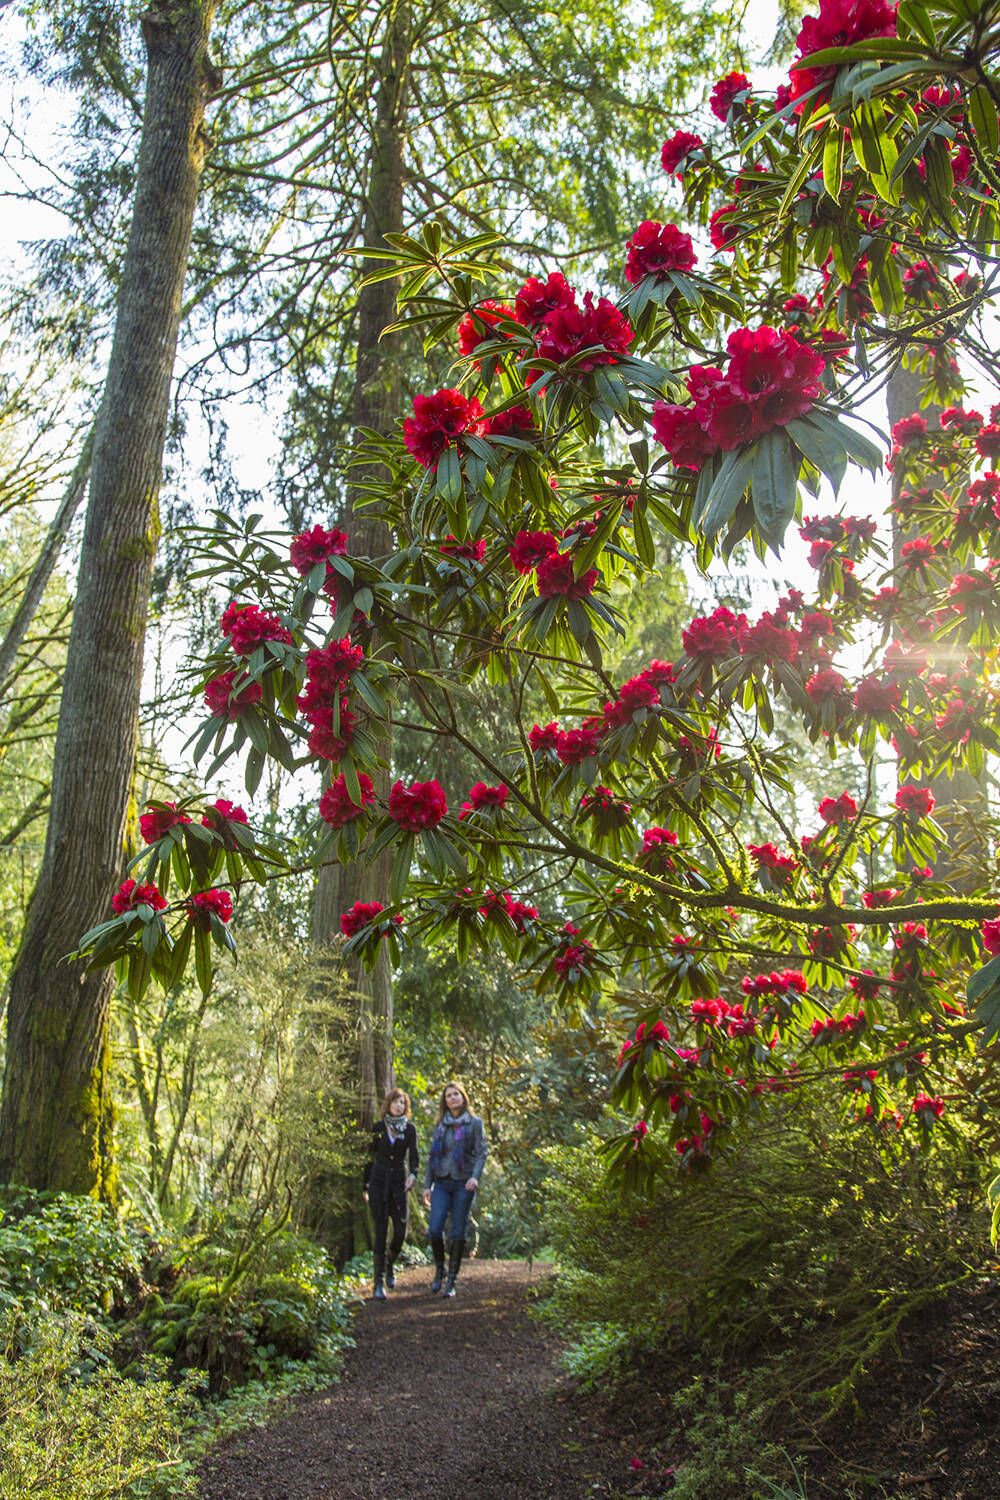 Bloedel Reserve’s Gratitude Days are sponsored days of free admission to its 150 acres of gardens and forested trails, with the opportunity for sponsors to select another community non-profit to honor and benefit on their sponsored day, if they wish.